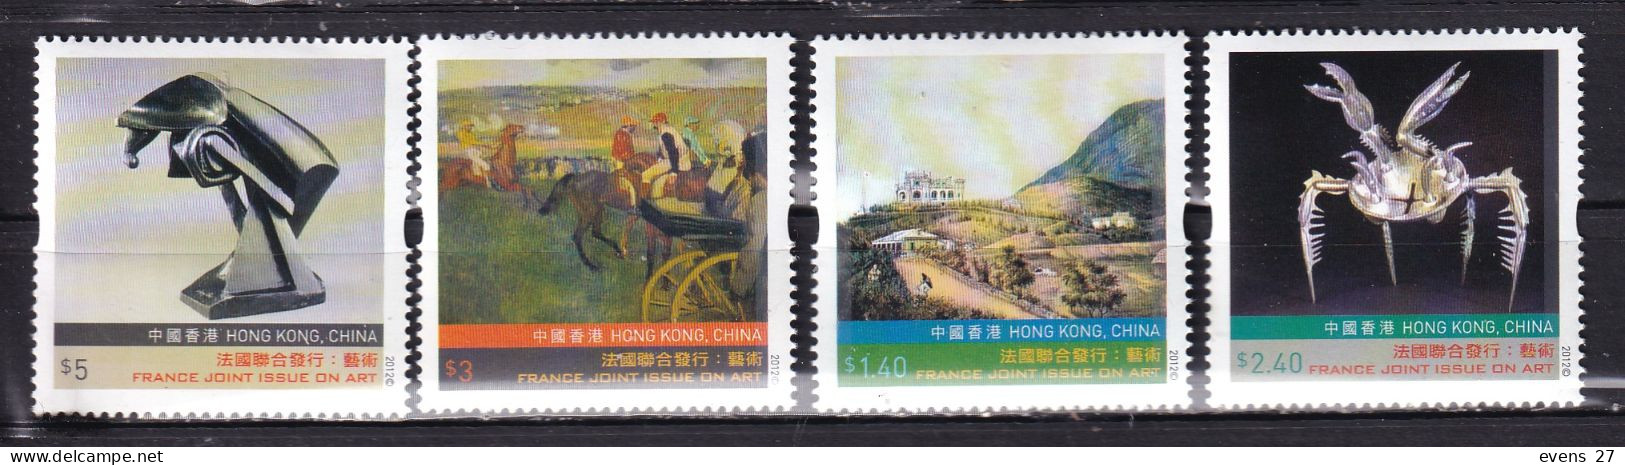 HONG KONG-2012-JOINT ISSUE WITH FRANCE-MNH. - Nuevos